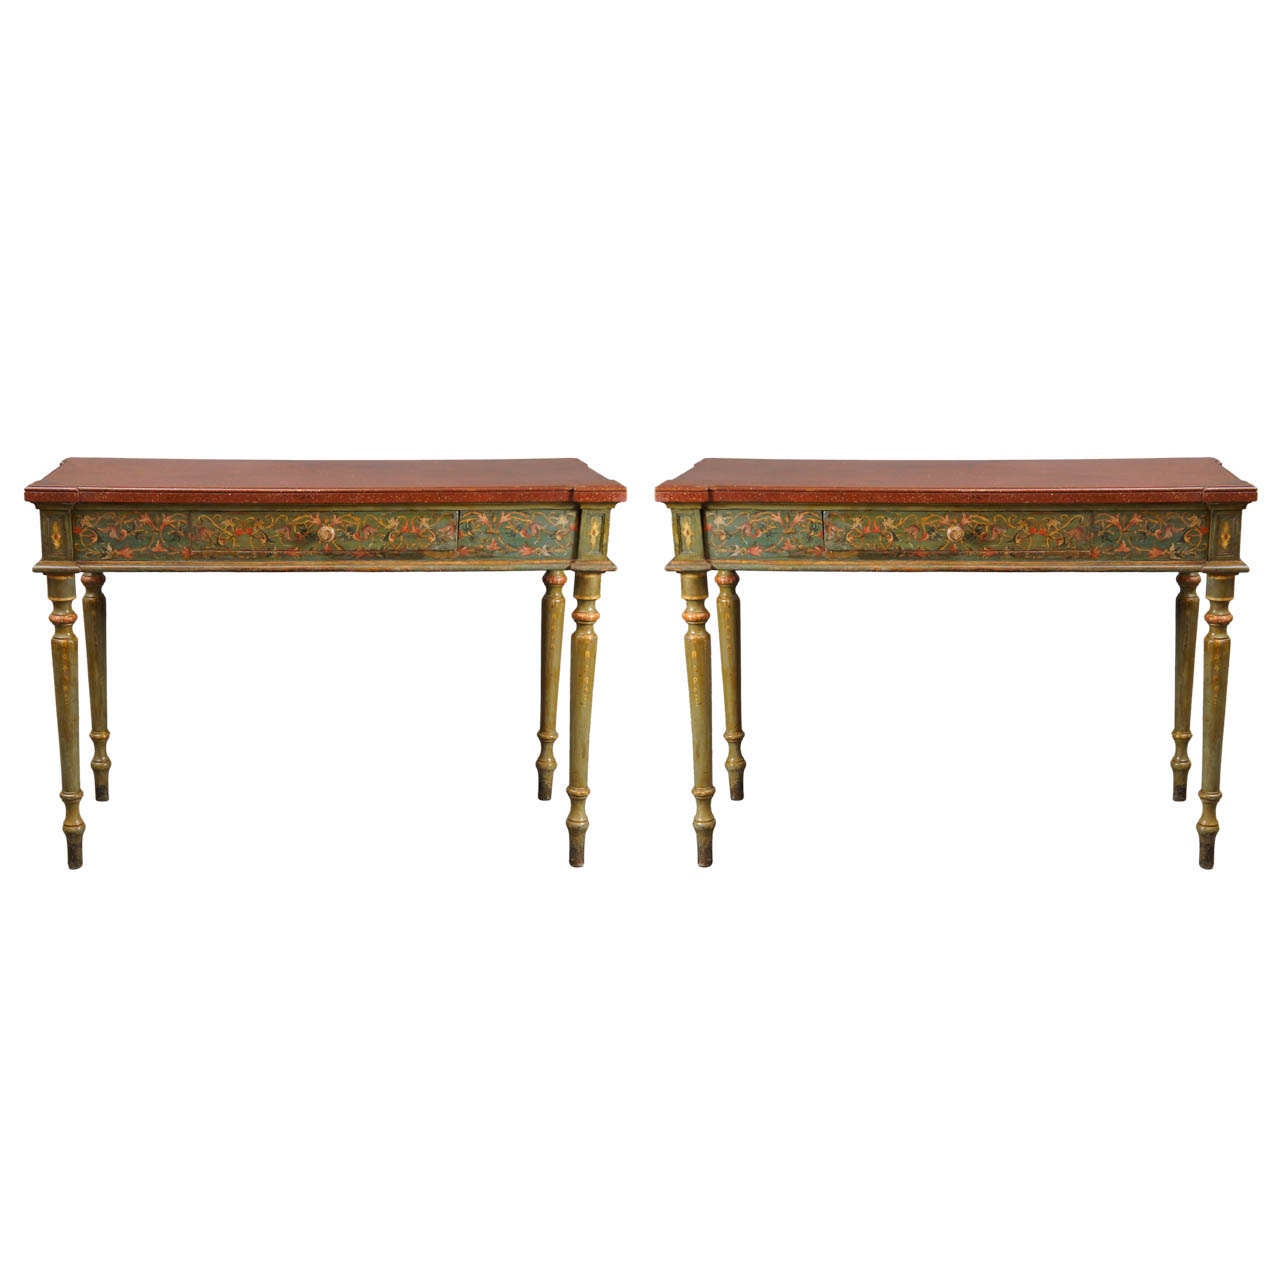 Continental Neoclassical-Style Pair of Painted Consoles